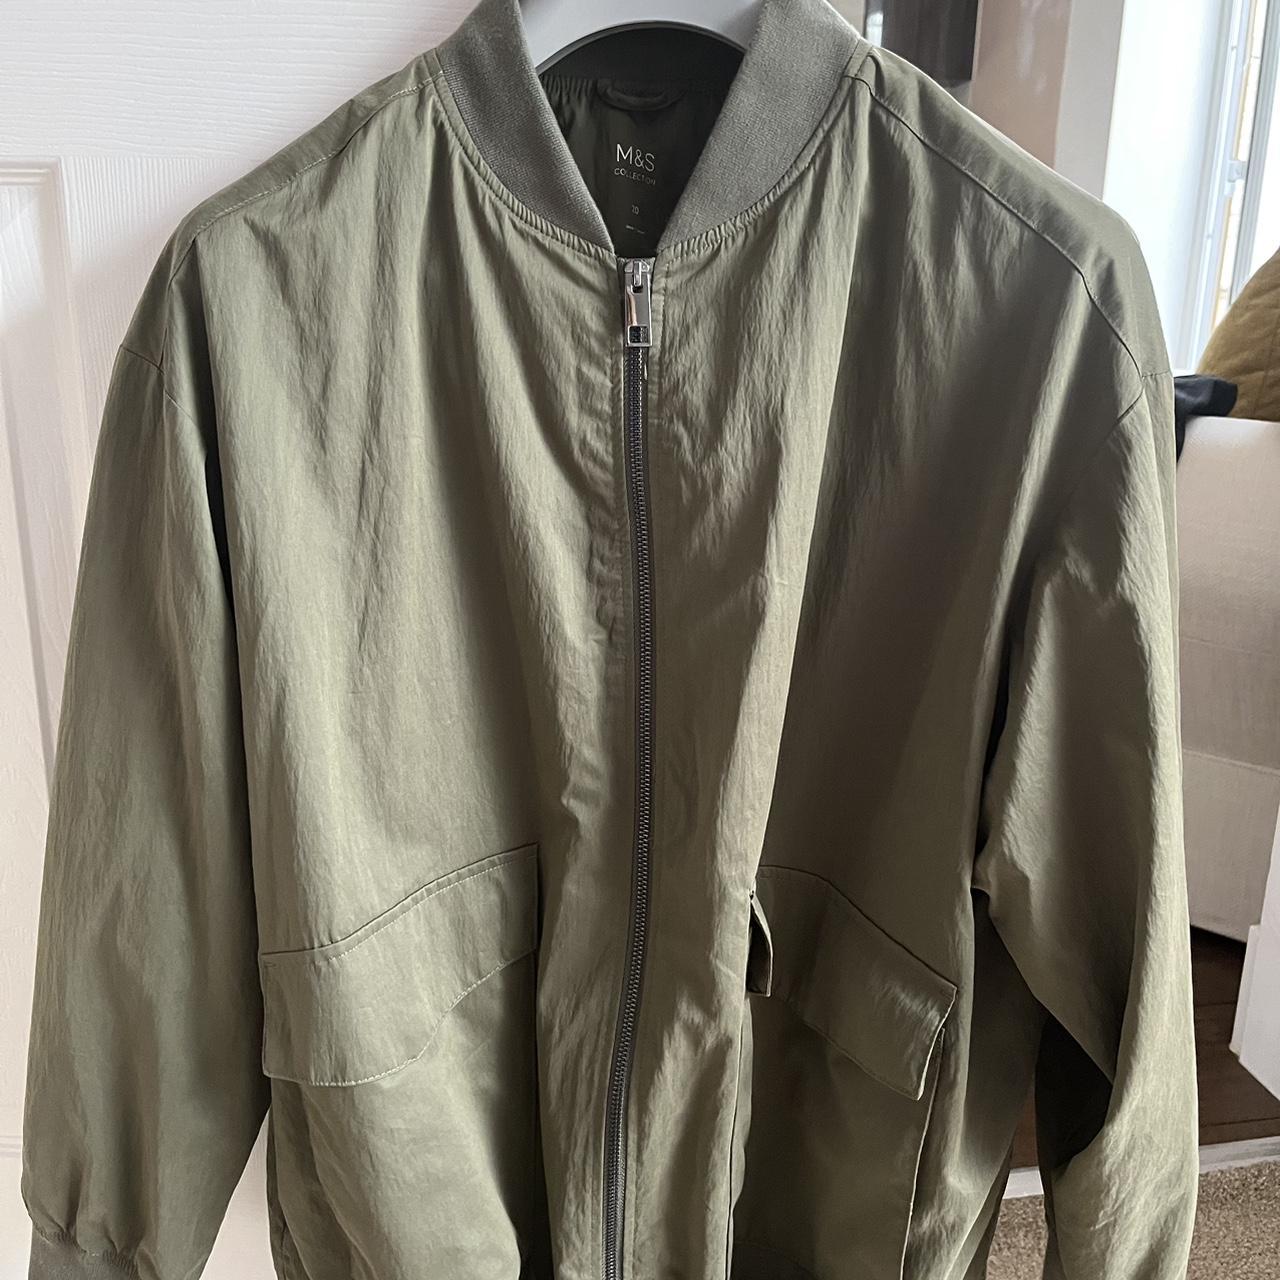 M&S rain coat/ like new in perfect condition/ worn... - Depop